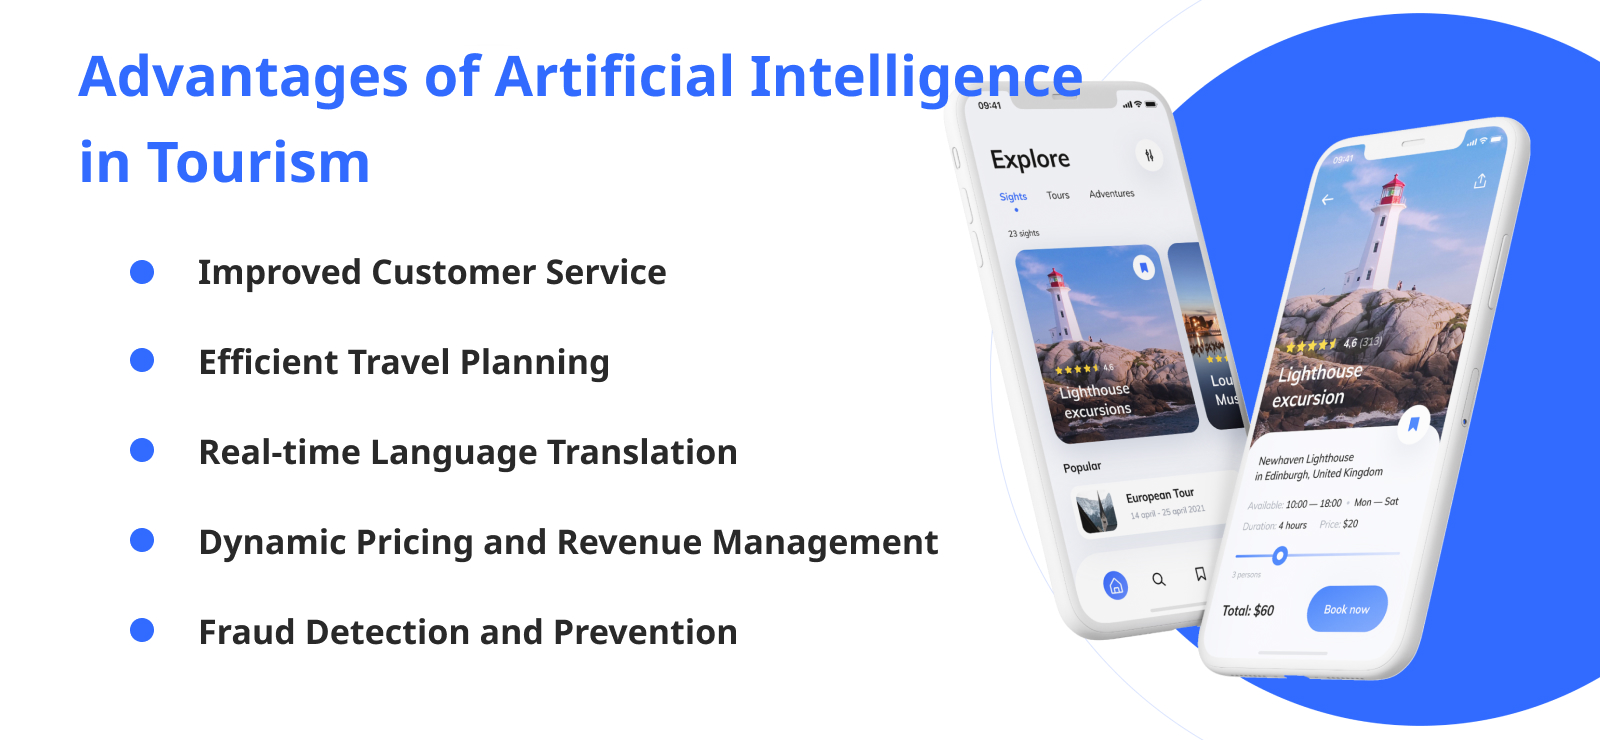 Advantages of Artificial Intelligence in Tourism